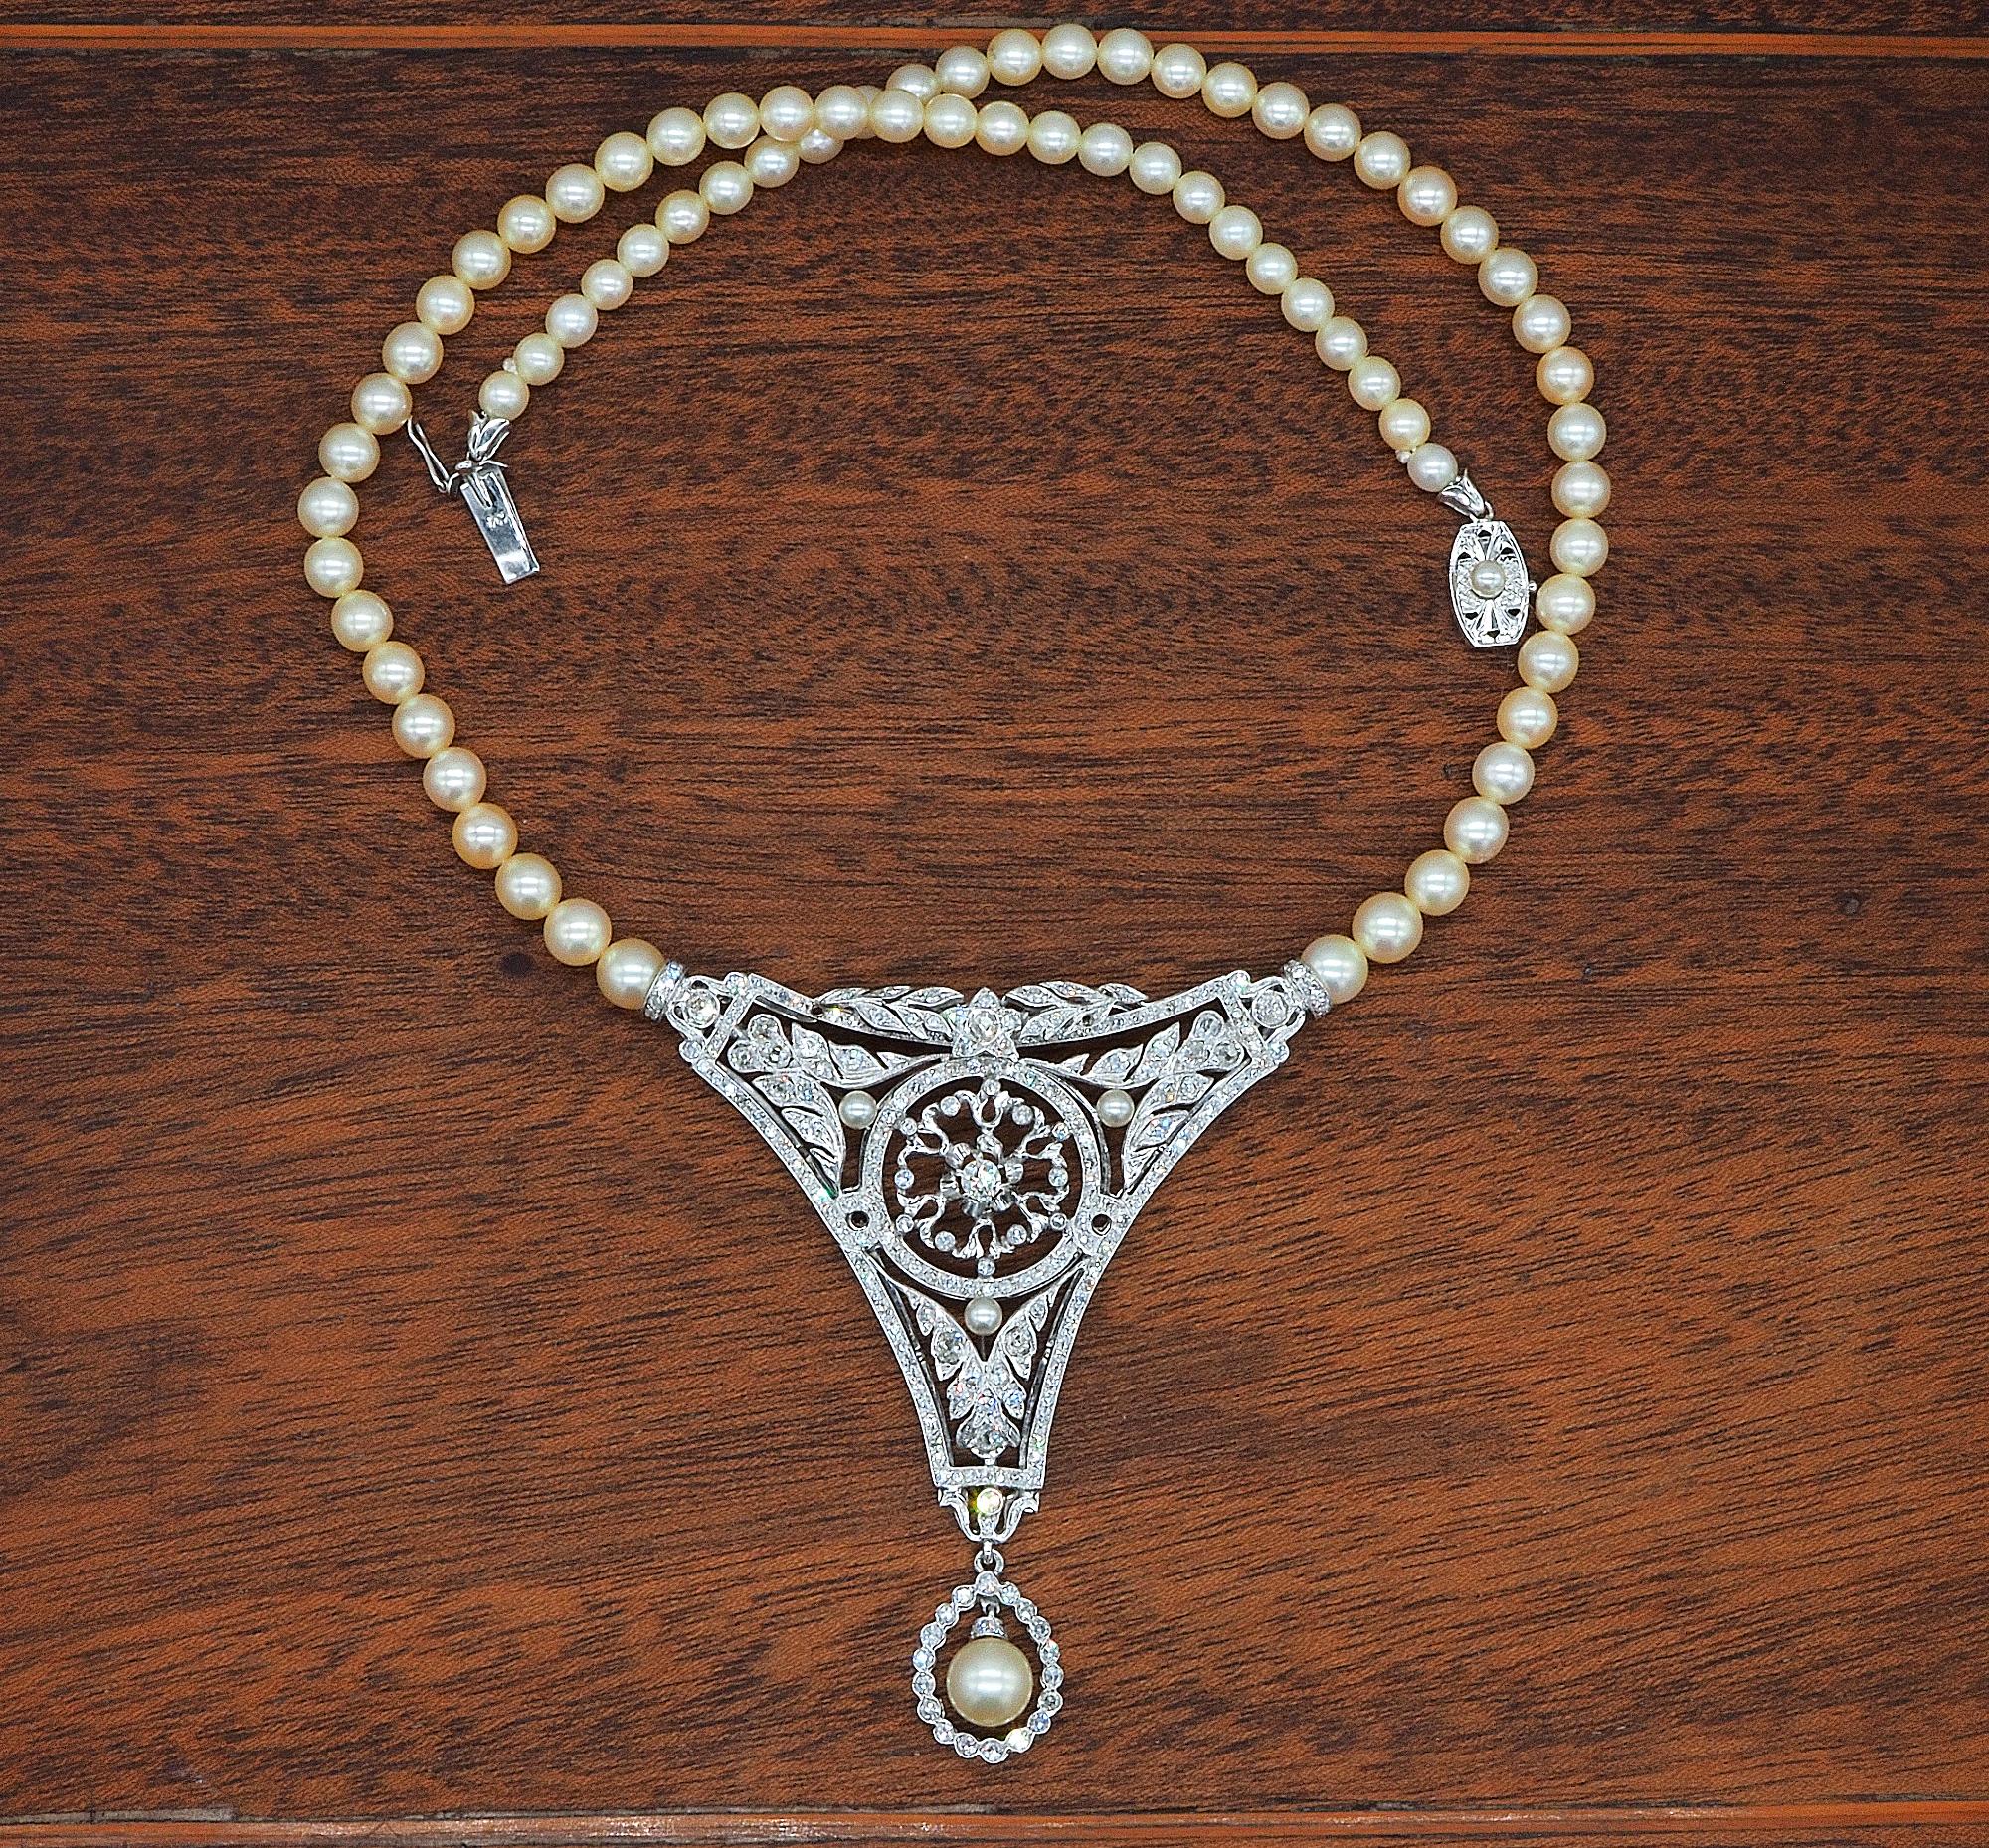 This enchanting vintage necklace is 1935 circa
Composed by a single strand of salt water cultured pearls ranging in sizes from 5 to 7 mm. - connected to an impressive large panel surmounted by Diamonds with suspending pearl as finial
Artful hand